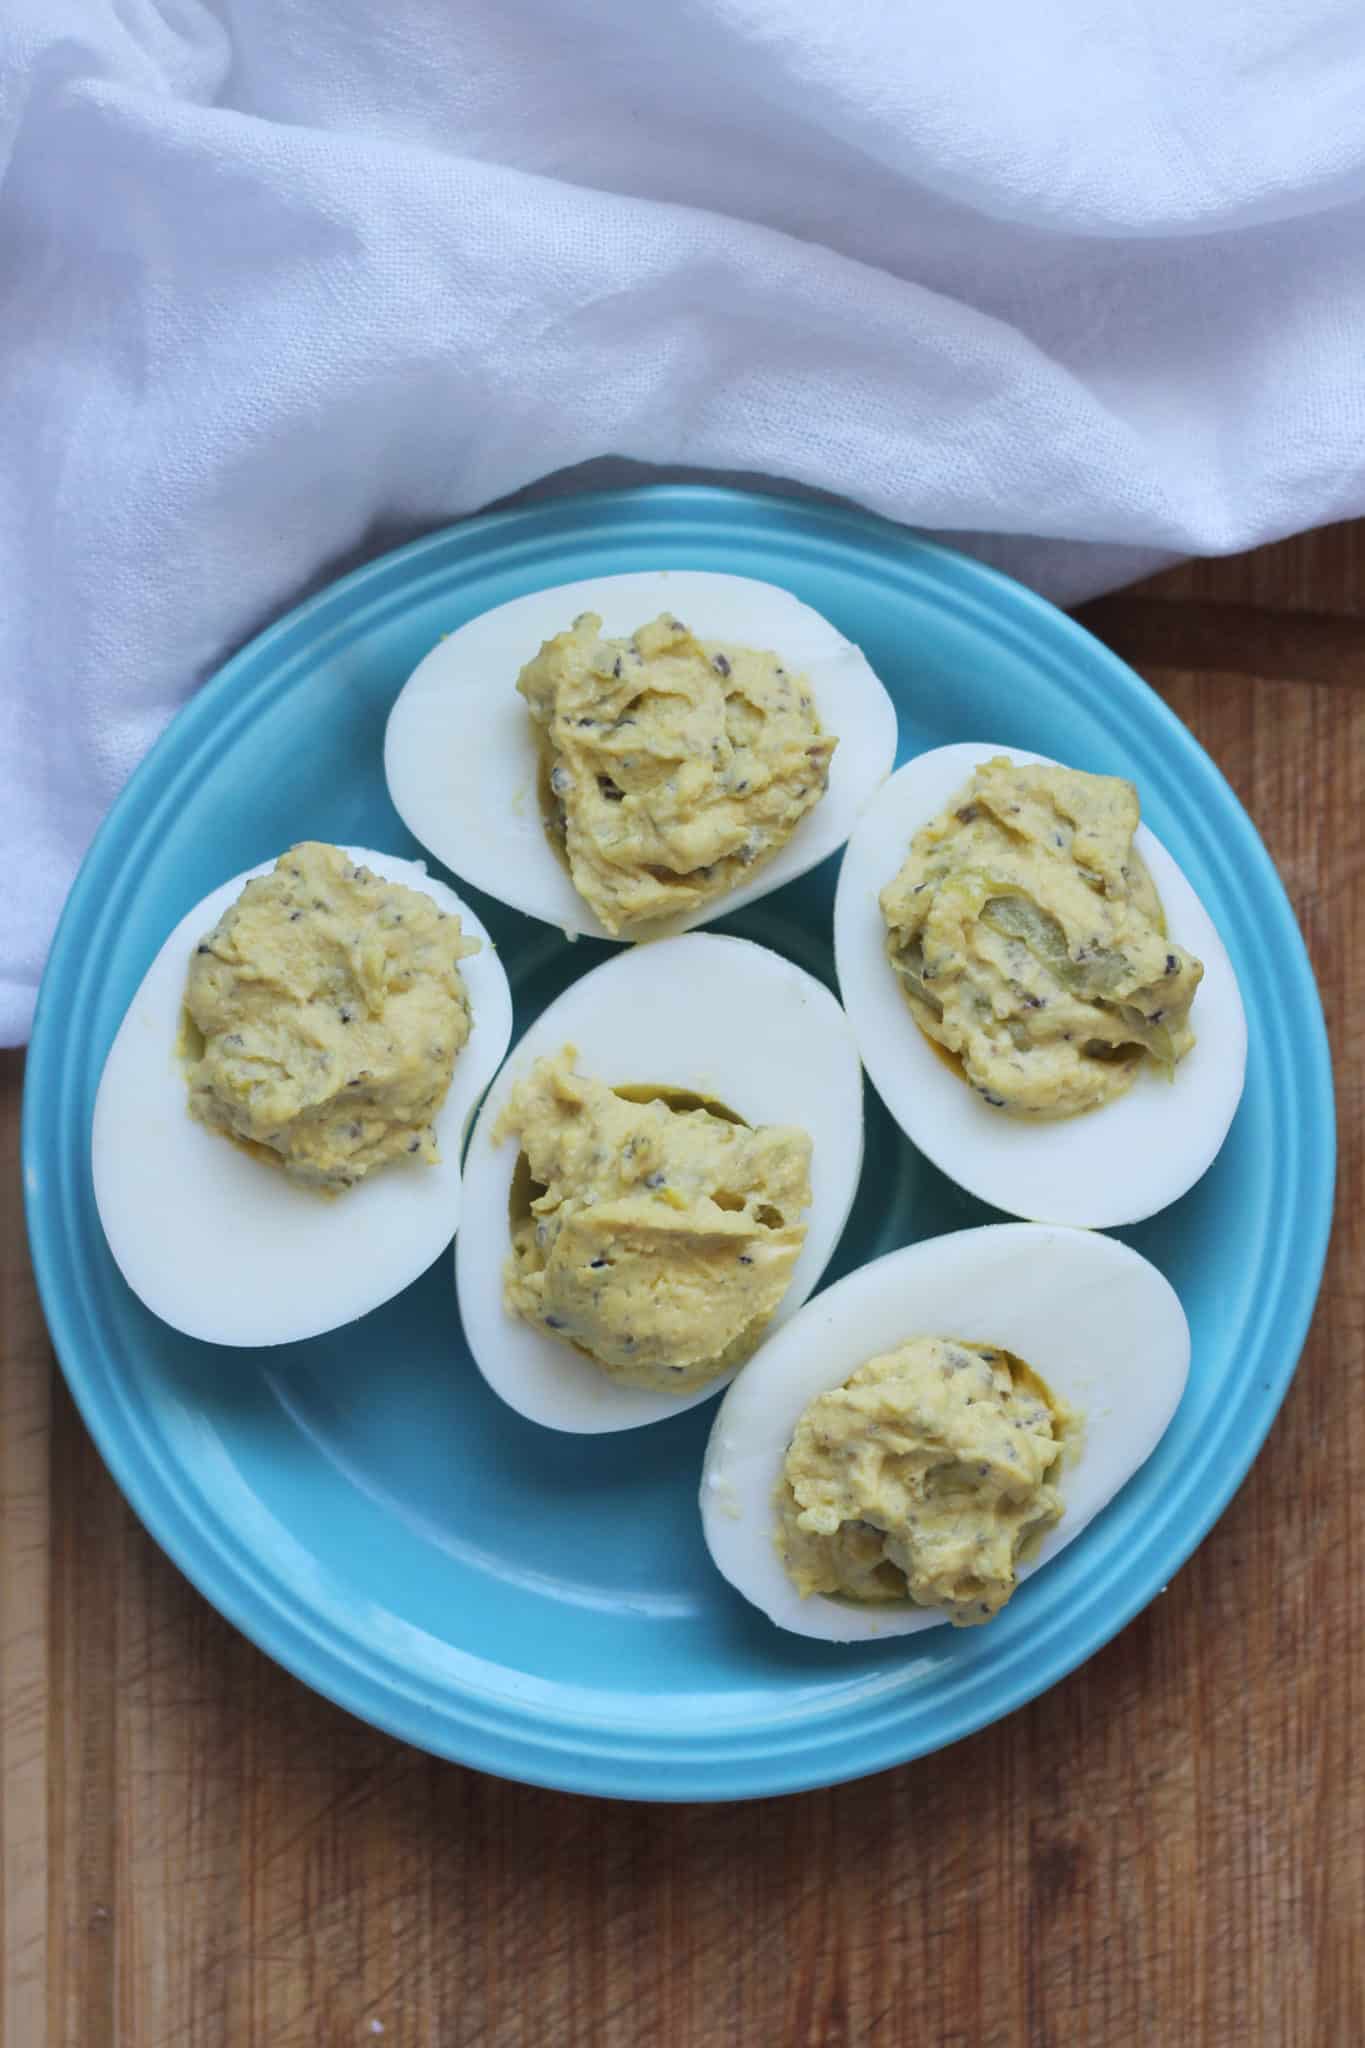 Keto Deviled Eggs : Deviled Eggs with Pickles and black Olives